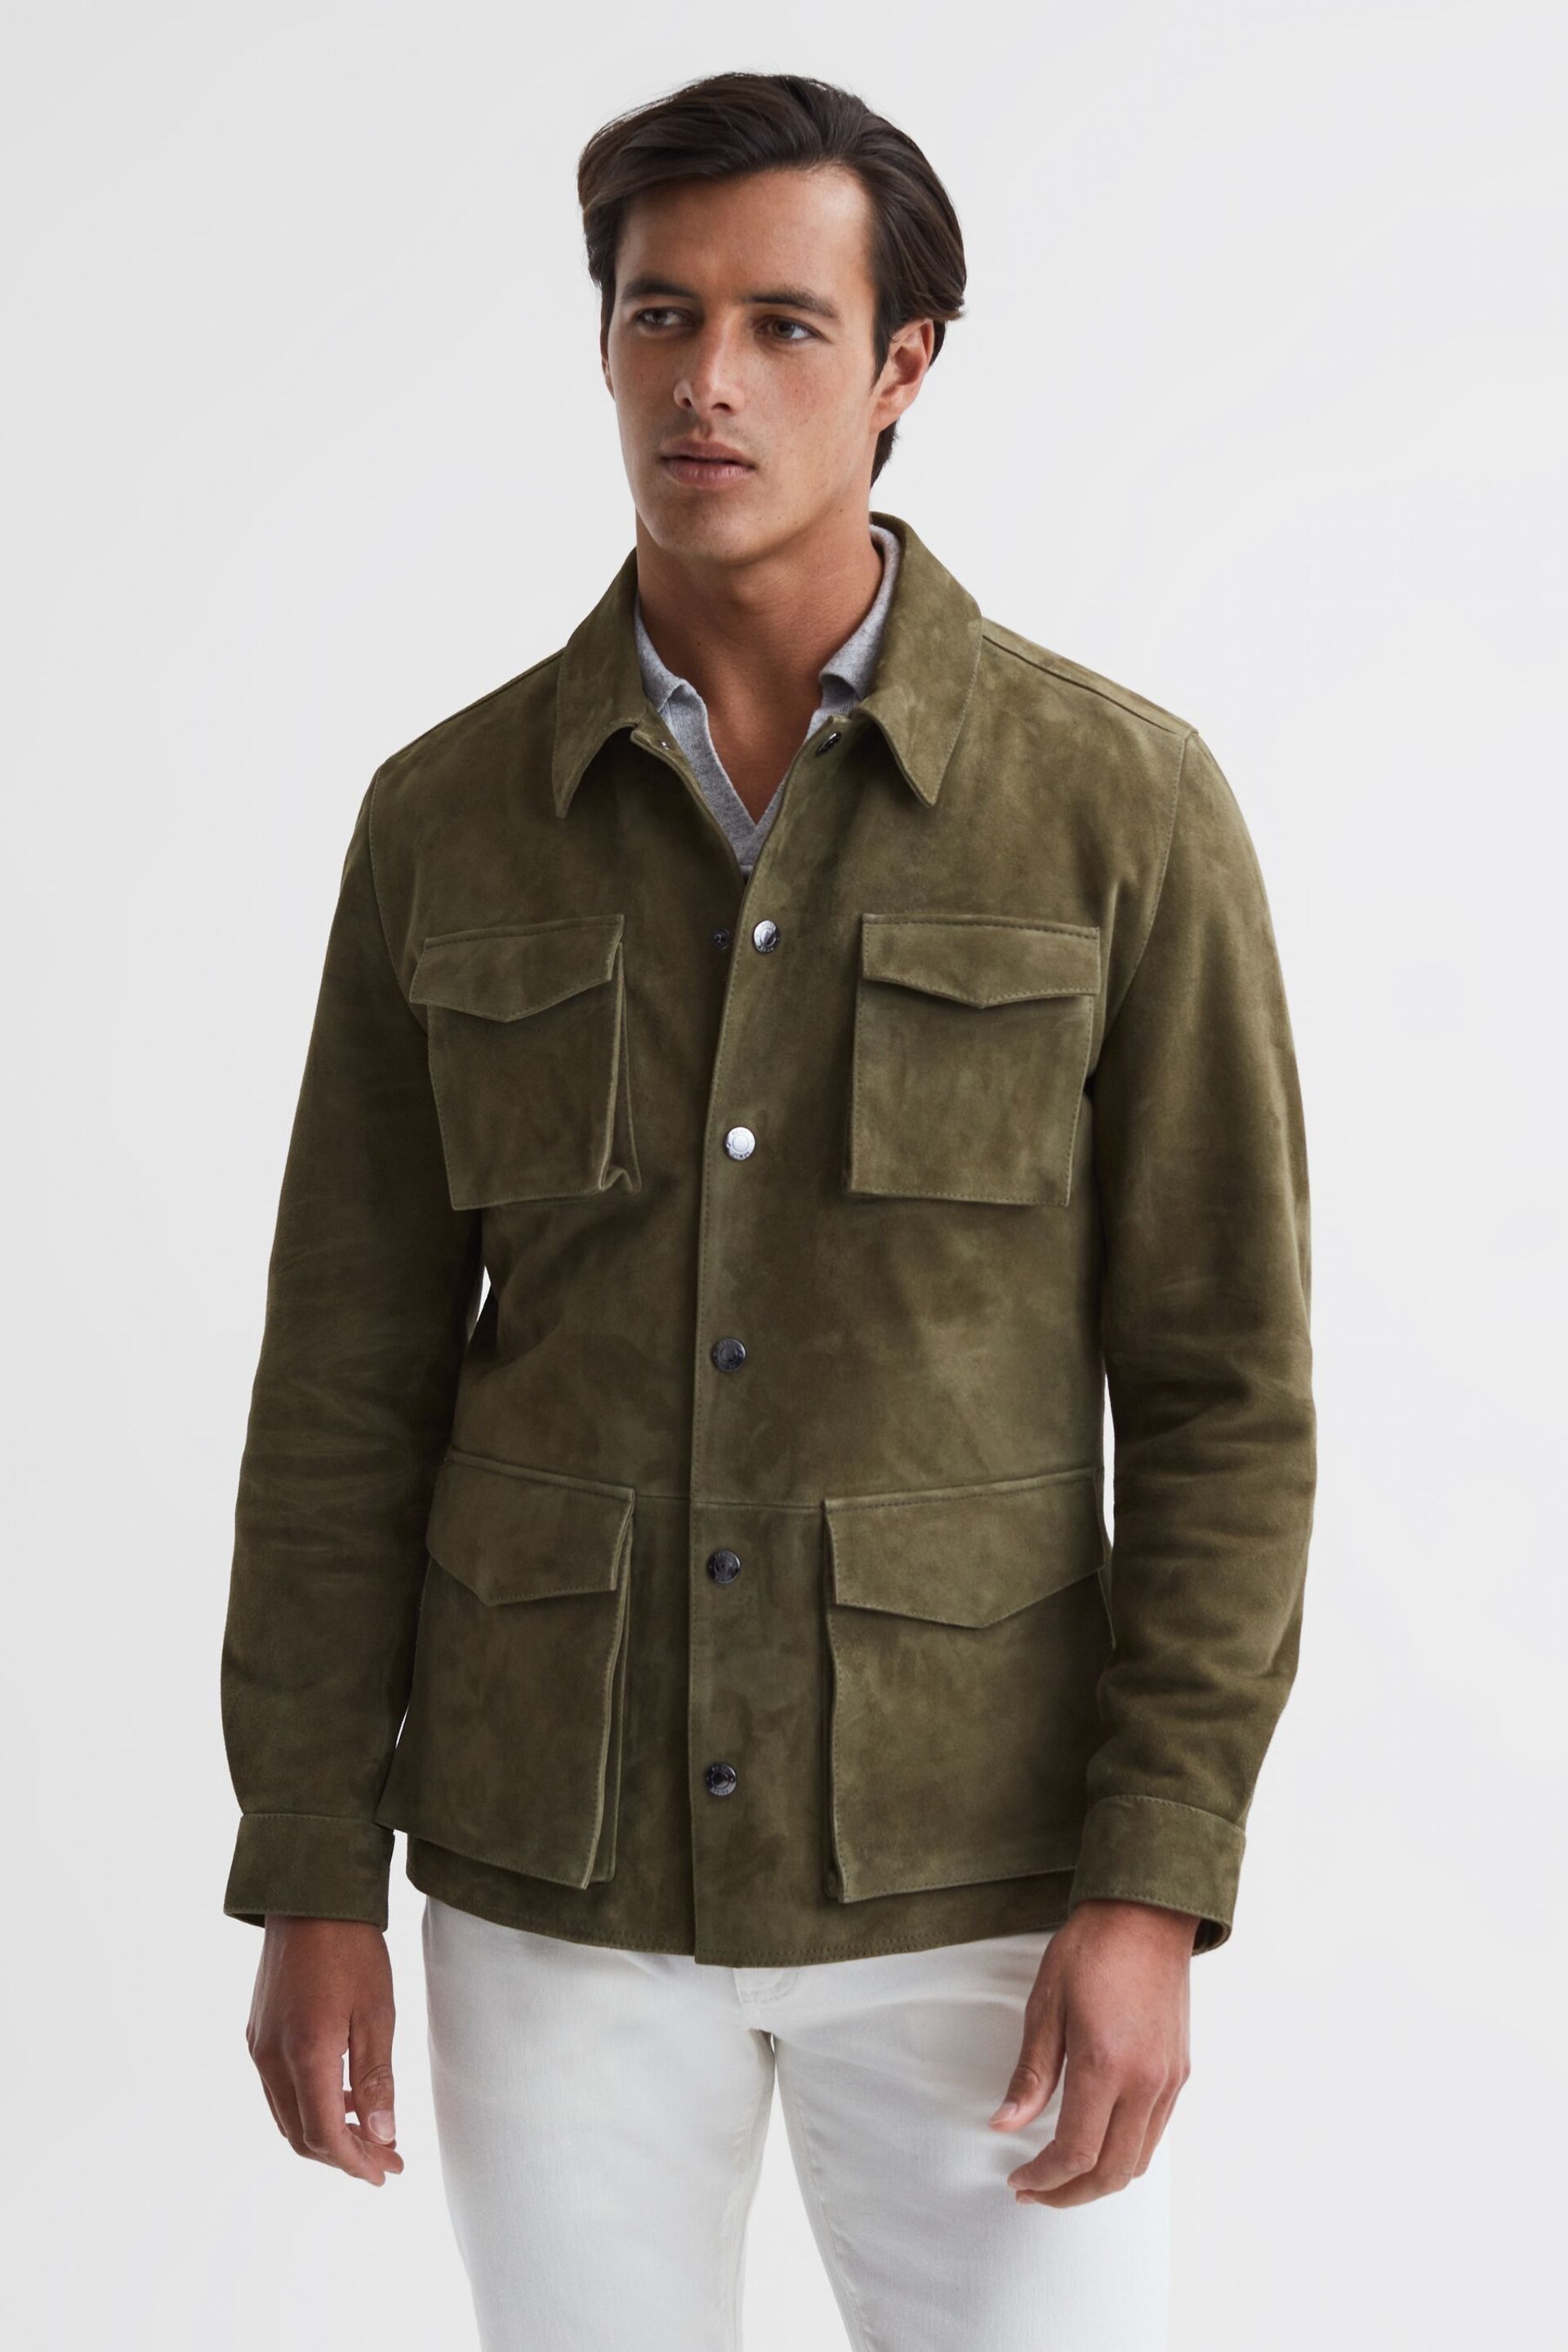 Reiss Sage Mays Suede Long Sleeve Four Pocket Jacket - Image 1 of 4